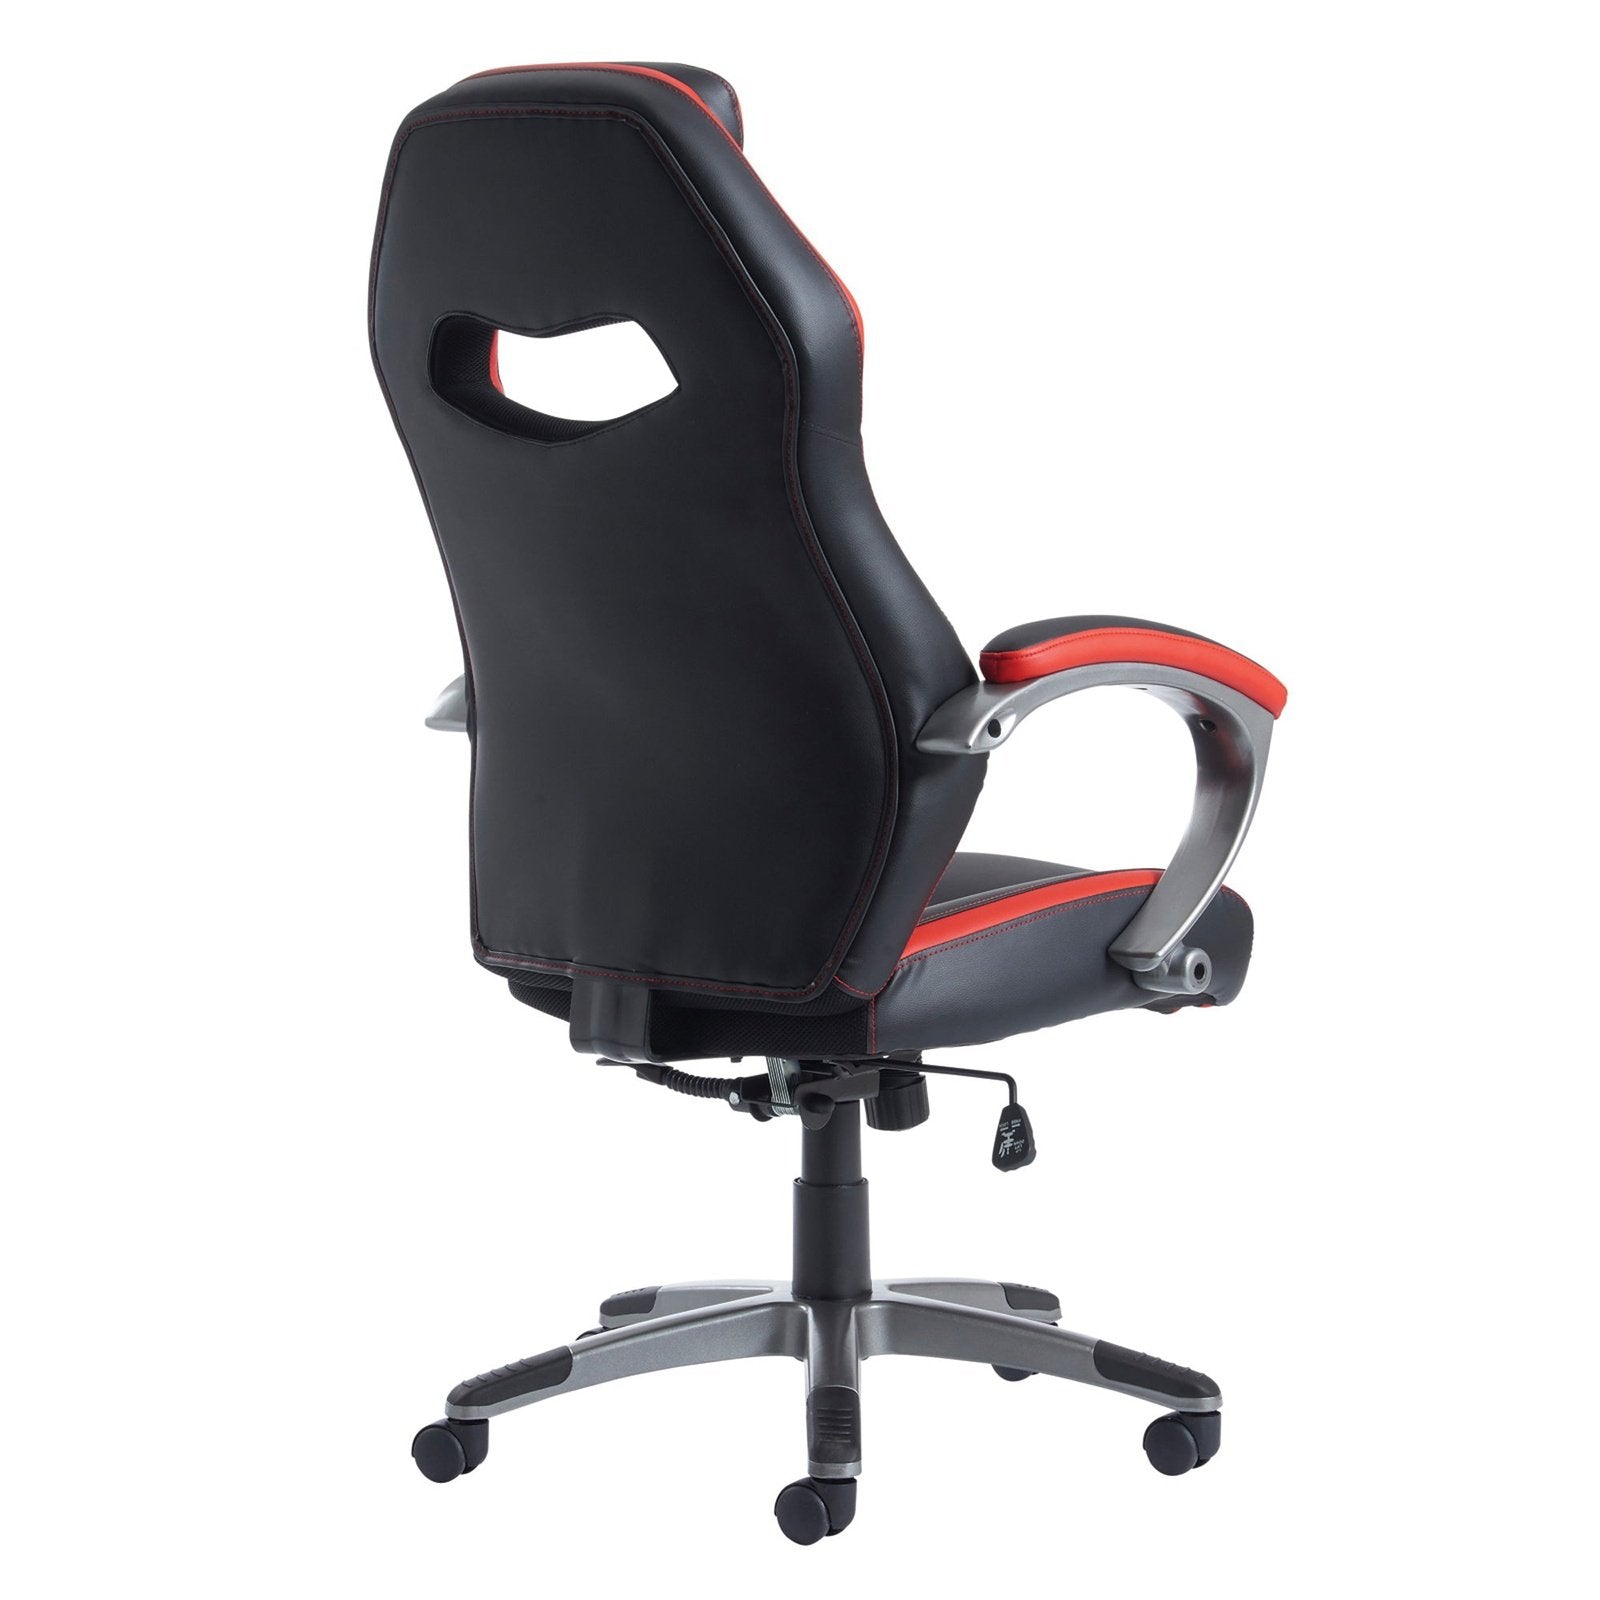 Jensen high back executive chair - black and red faux leather - Office Products Online